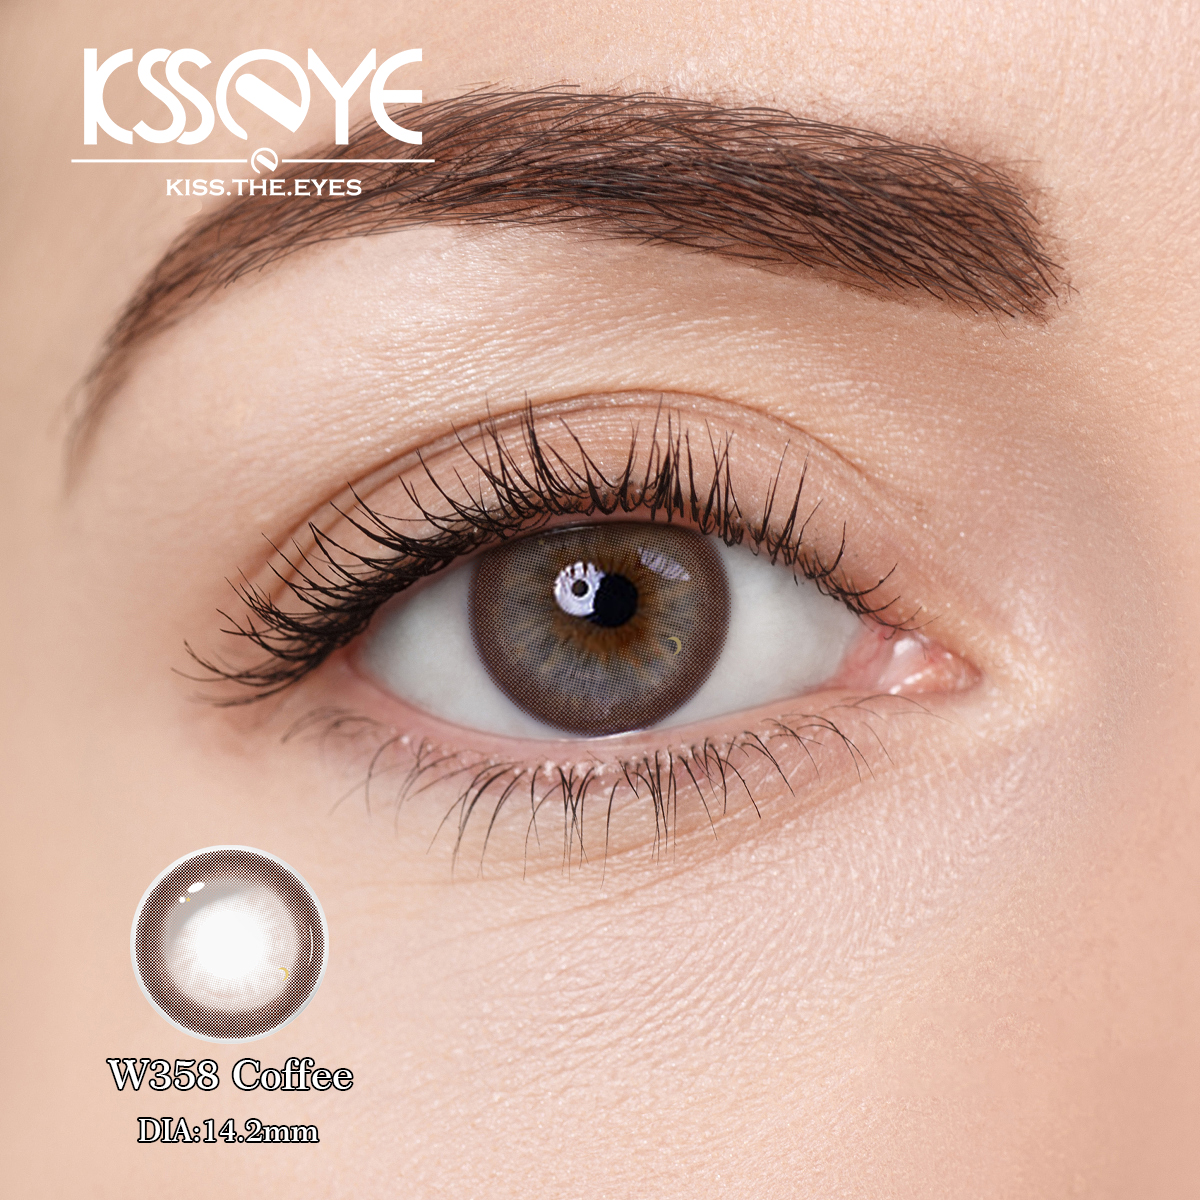 ODM Realistic Circle Eye Contact Lenses 14.0mm For Brown Eyes